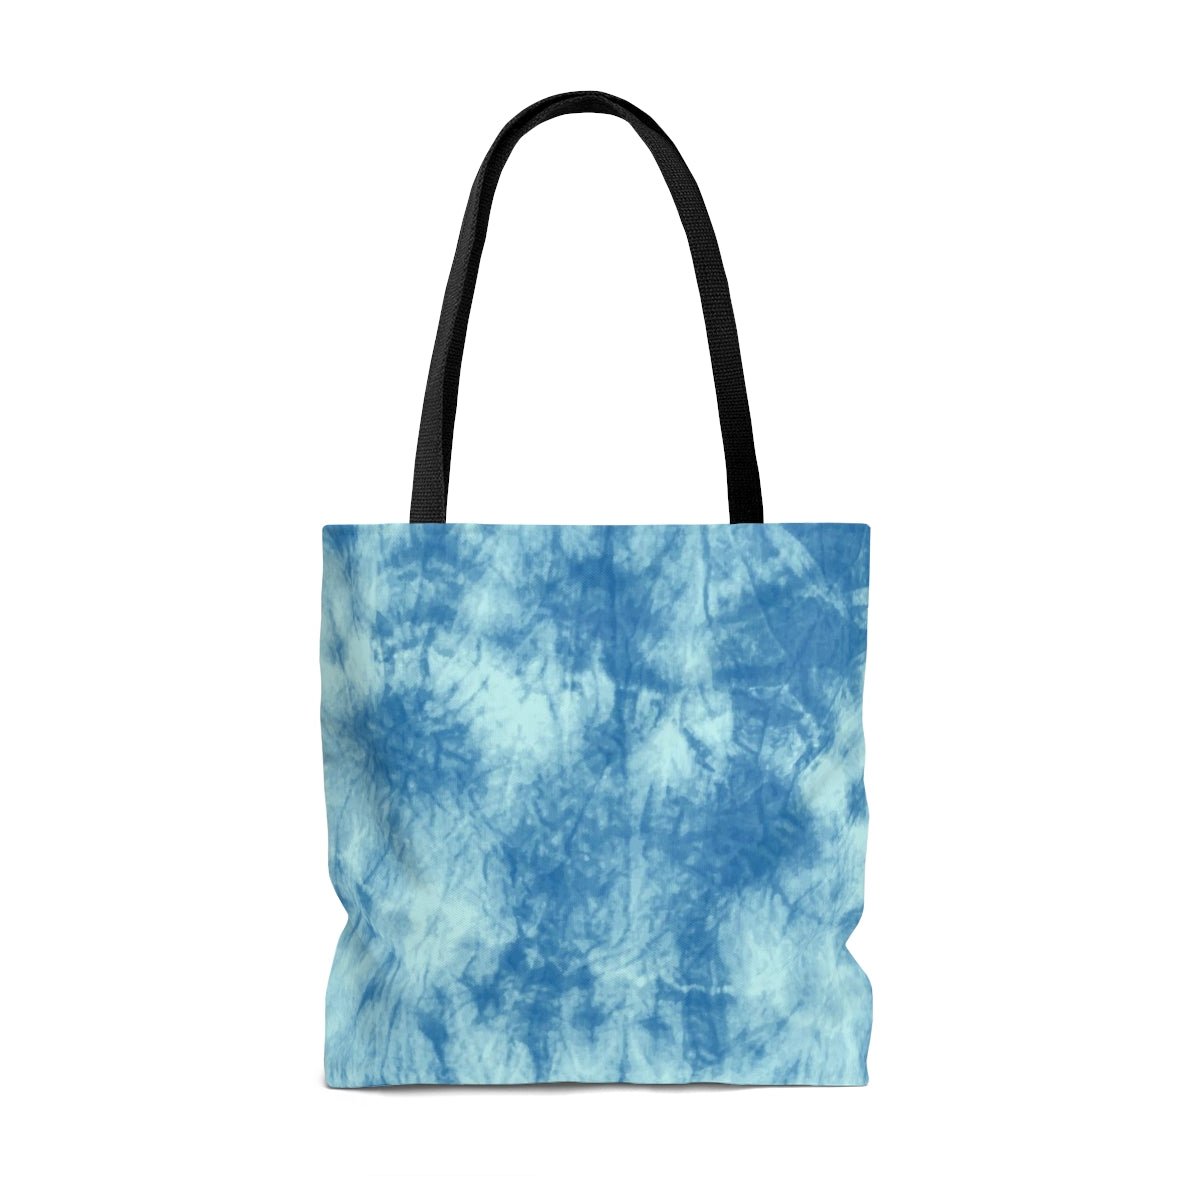 BLUE ACIDWEAR Tote Bag | CANAANWEAR | Bags | All Over Print